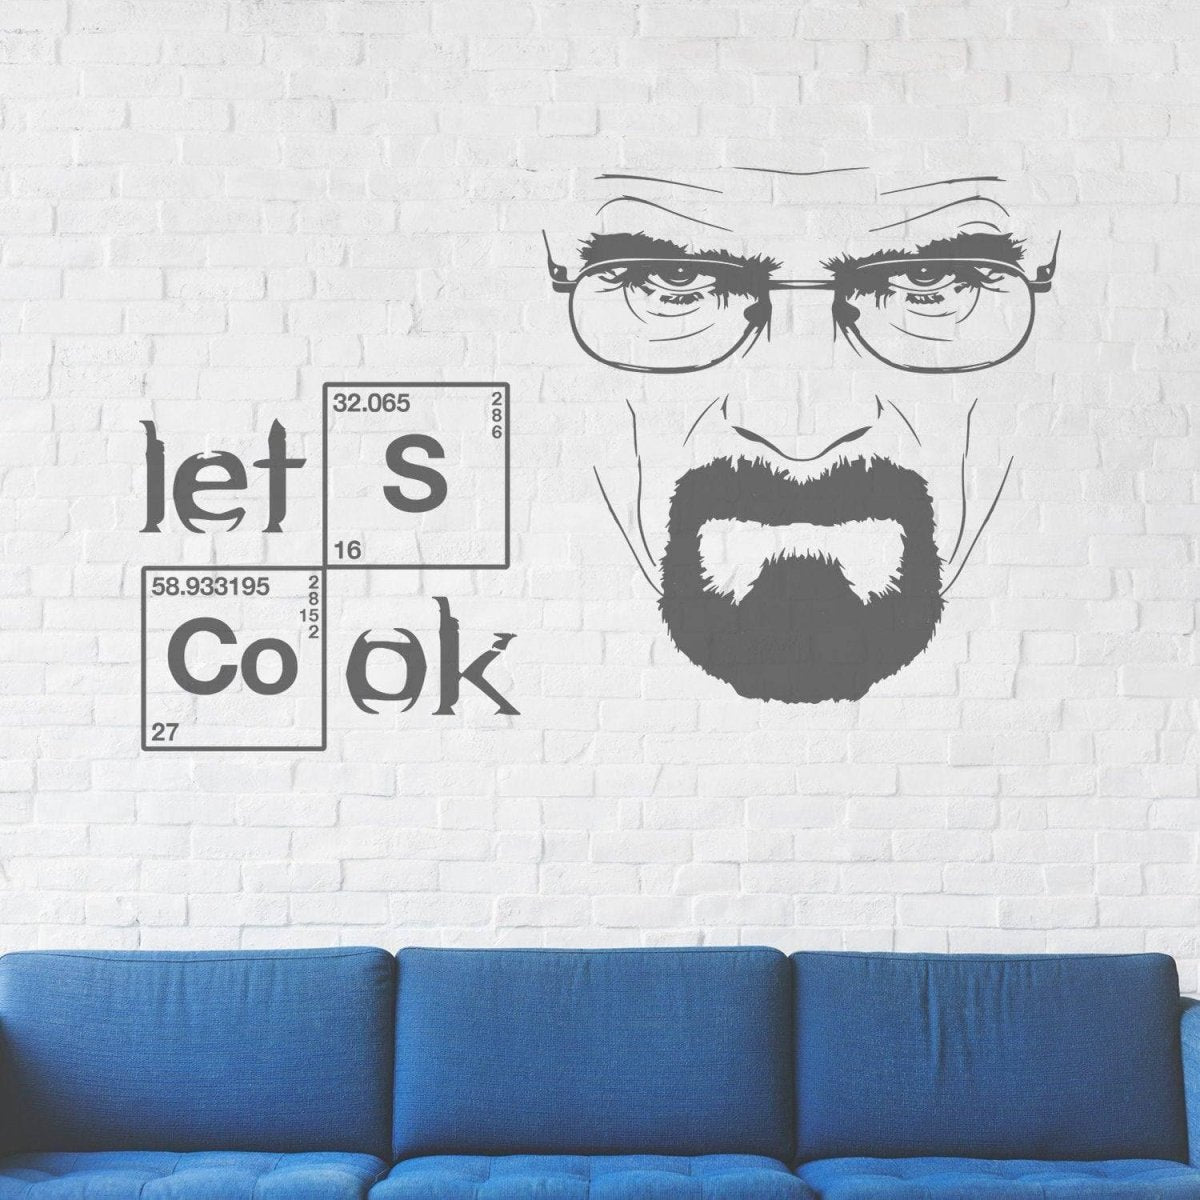 "Breaking Bad" Themed Quote Wall Sticker Decal - Kitchen Wall Decorations - Decords